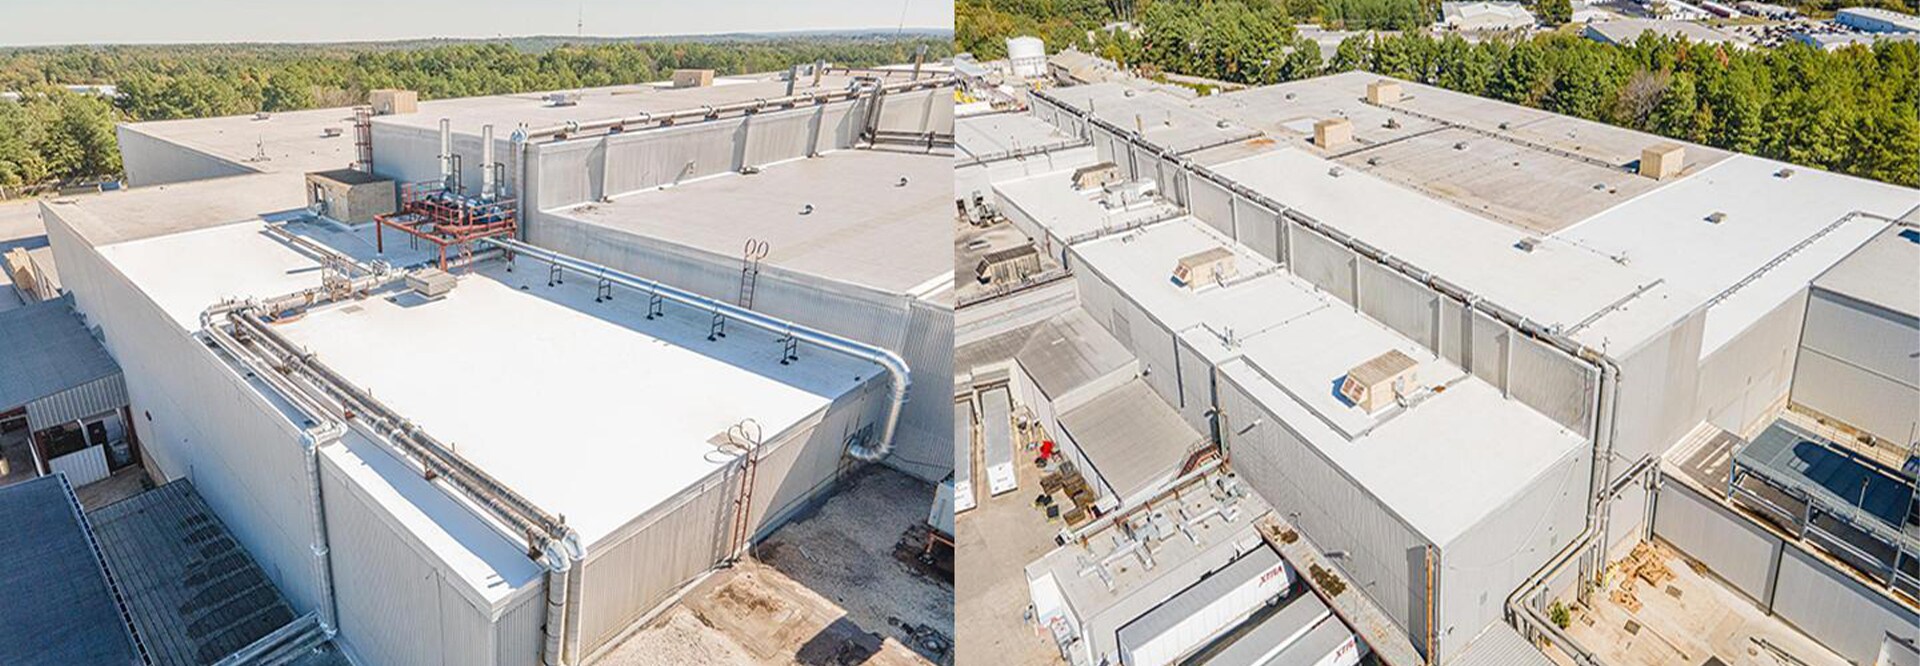 Aerial photos of Trane Technologies buildings in Tyler, TX with new GAF commercial roofing materials